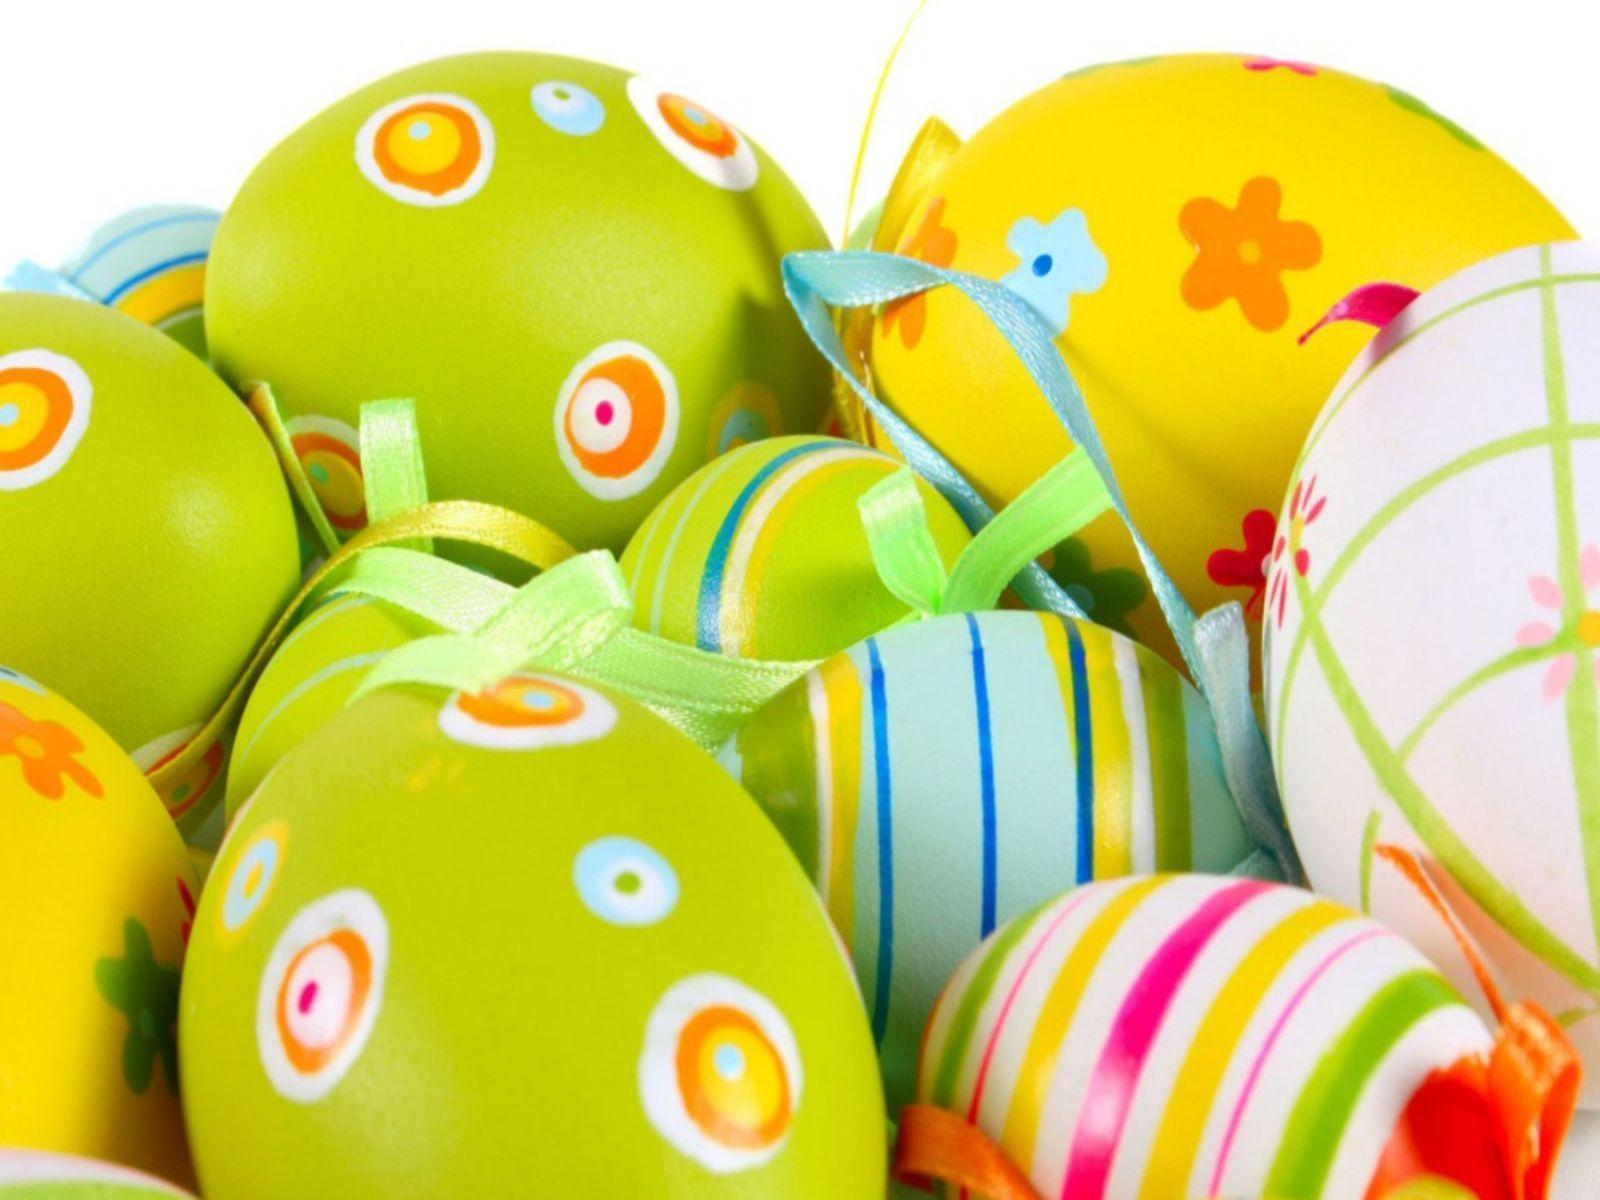 Happy Easter day 2014 Desktop Backgrounds and Download free Happy